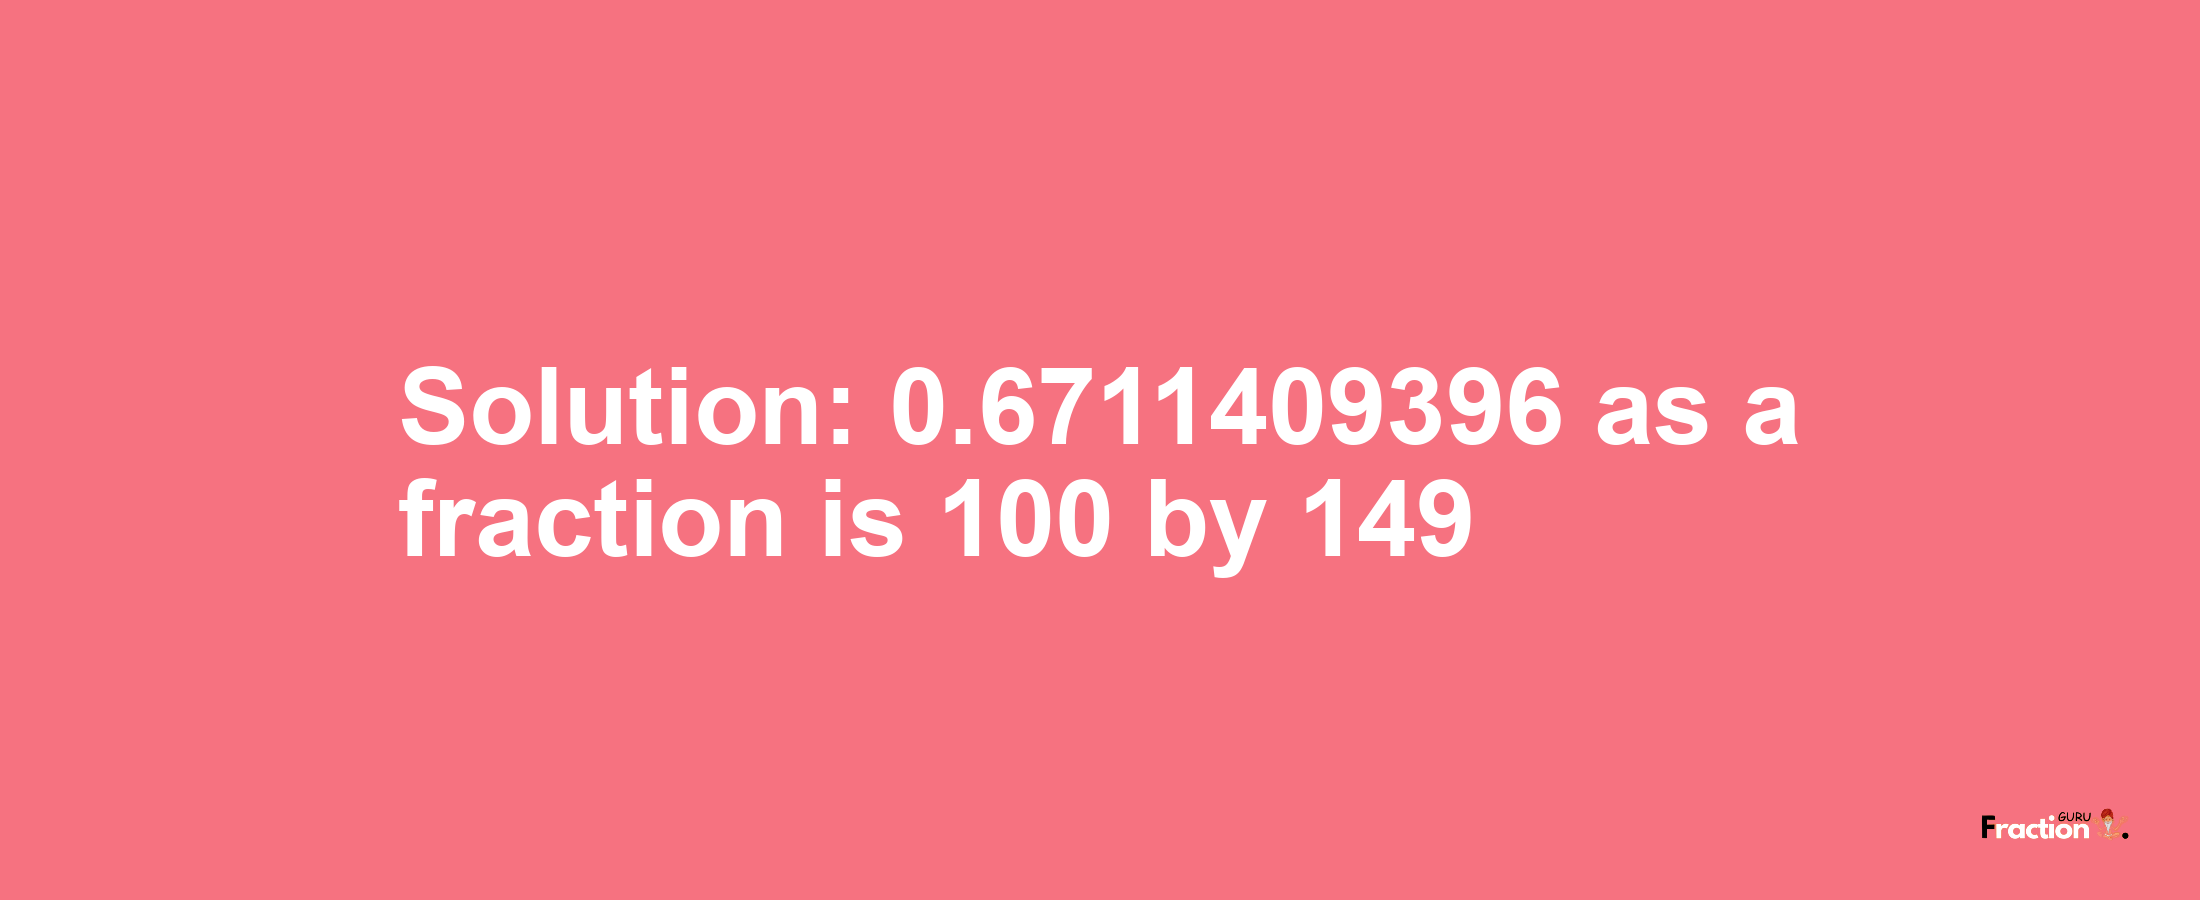 Solution:0.6711409396 as a fraction is 100/149